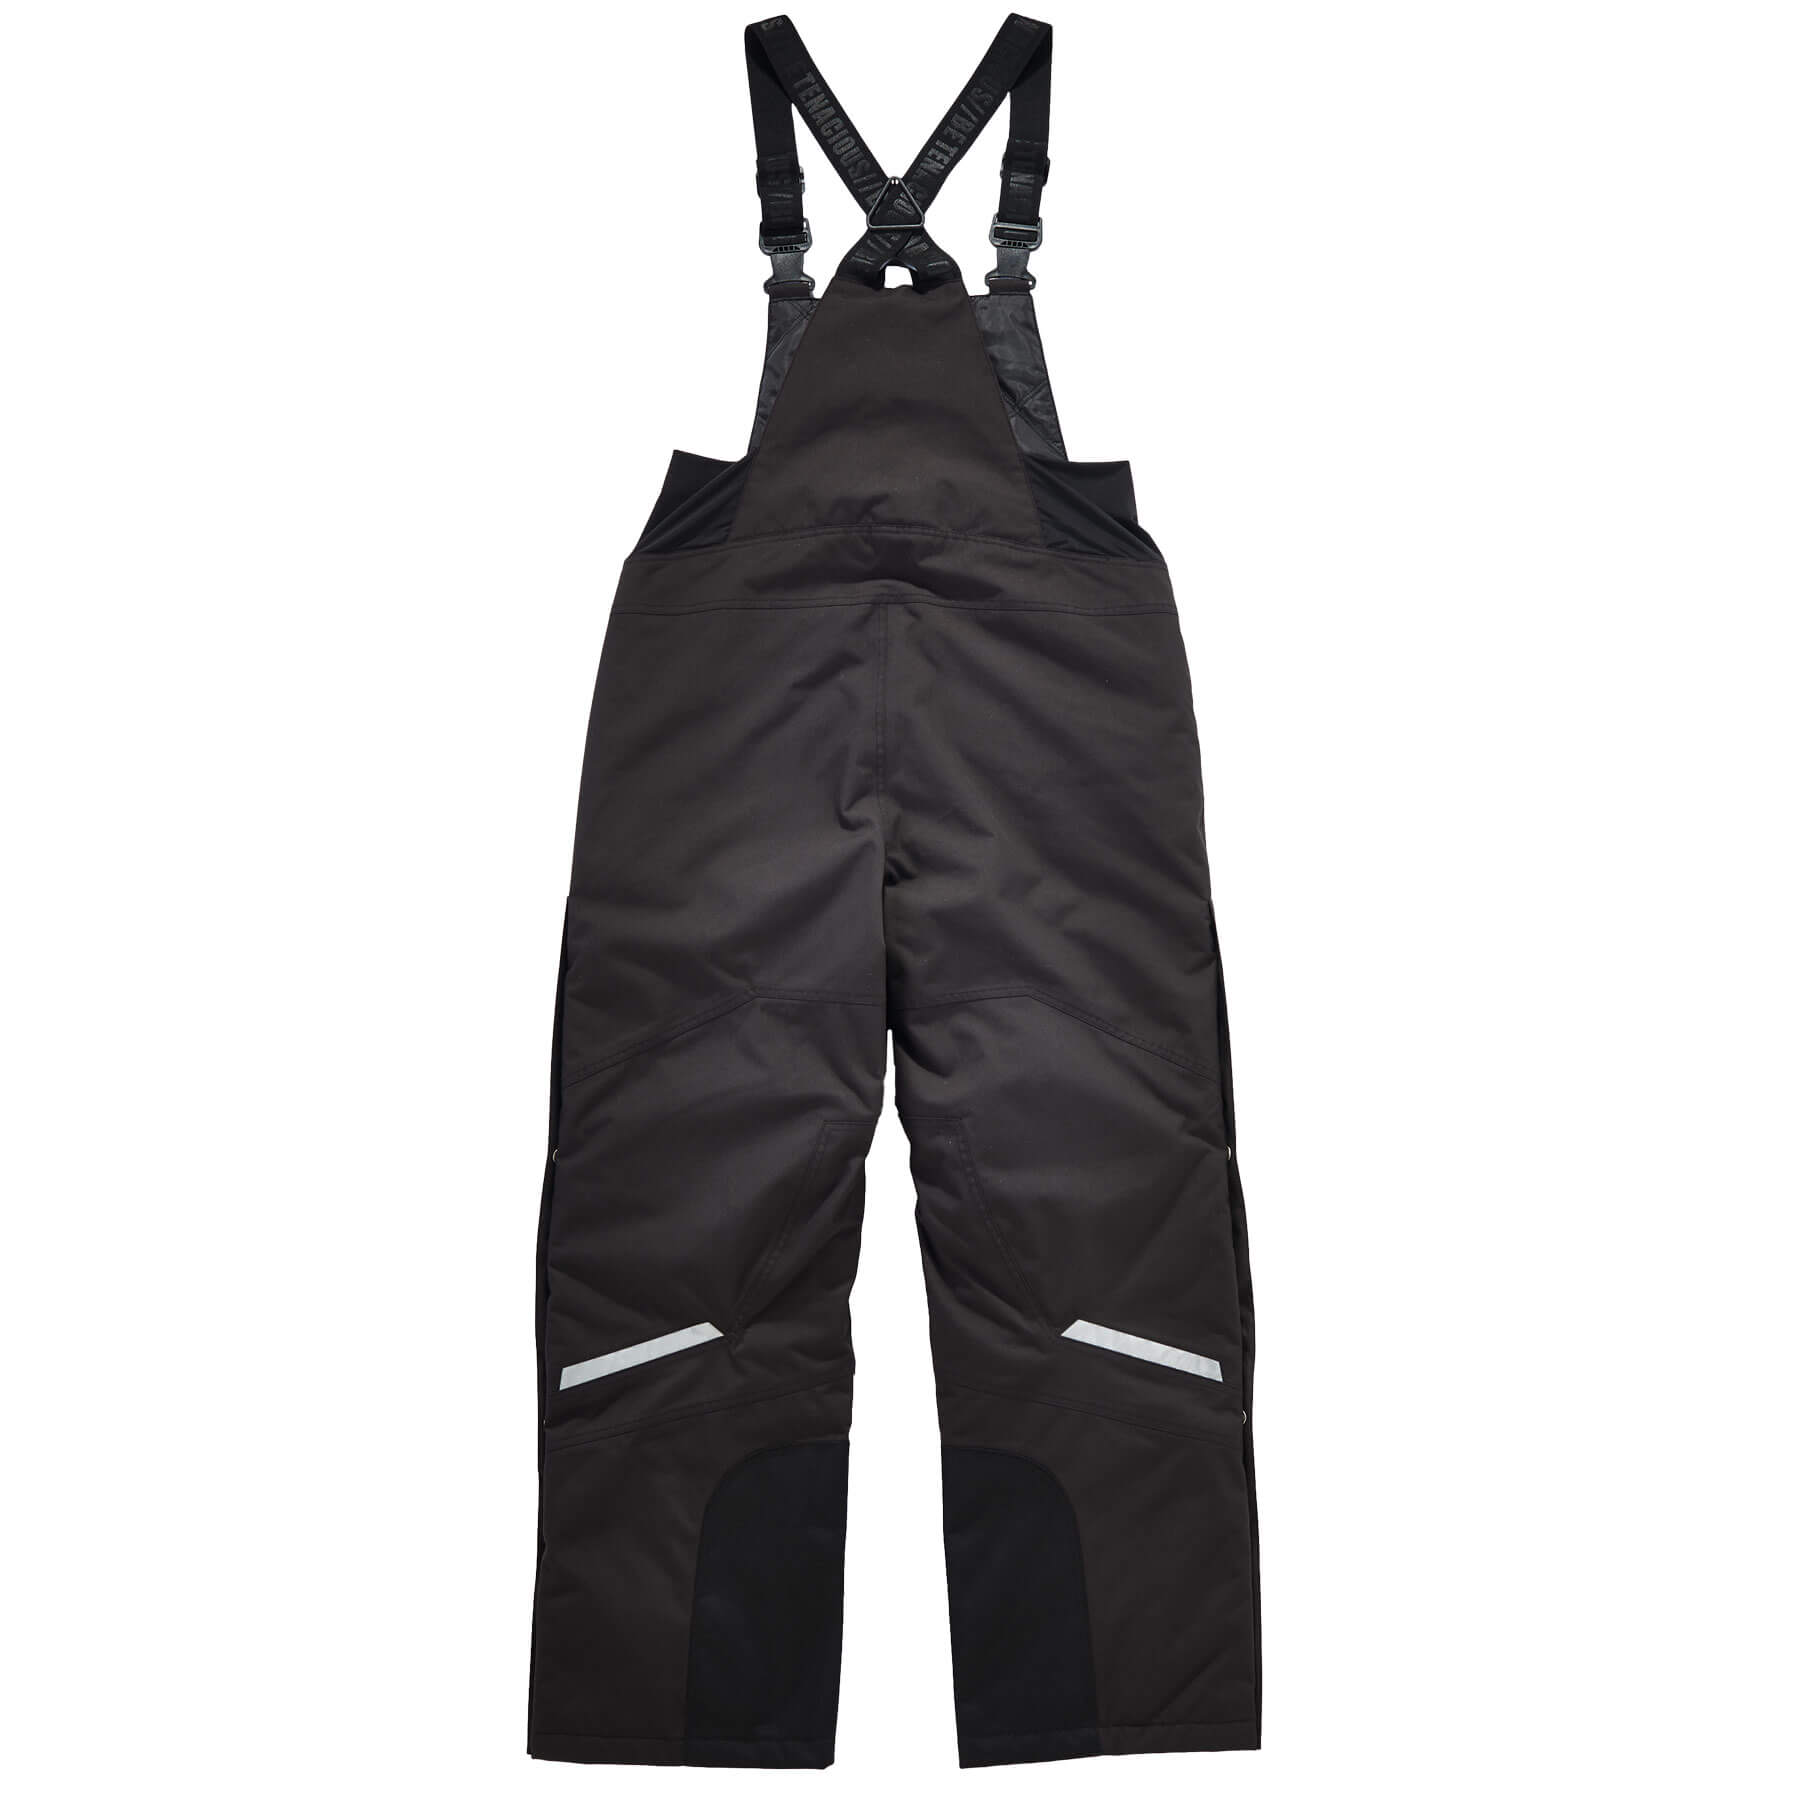 PANTS OR BIB OVERALLS: WHICH IS BEST FOR WORKING IN THE COLD